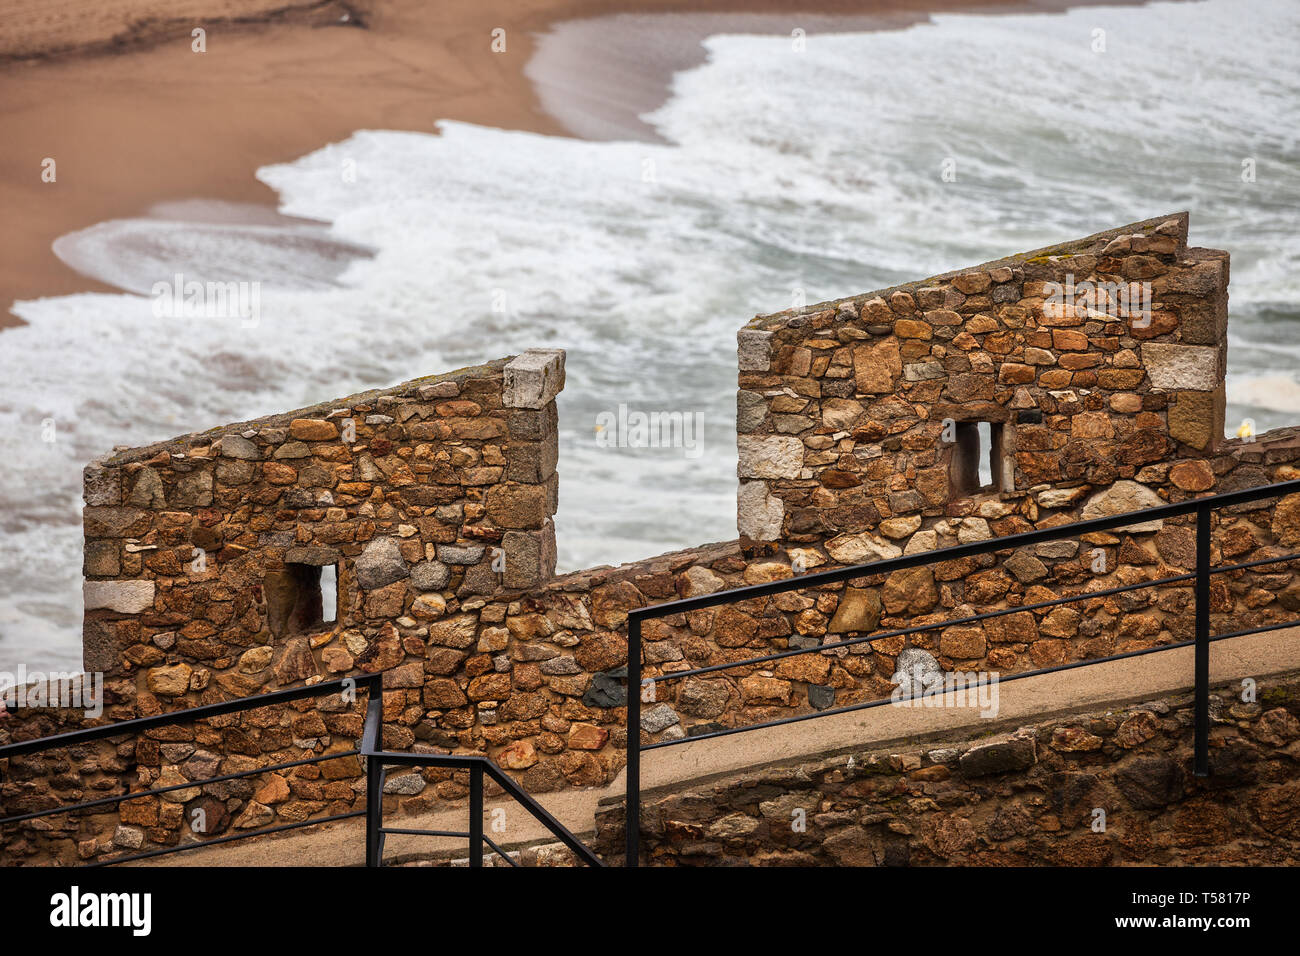 Defensive medieval stone wall battlement with two merlons and embrasures by the sea, old city wall fortification in Tossa de Mar, Catalonia, Spain Stock Photo